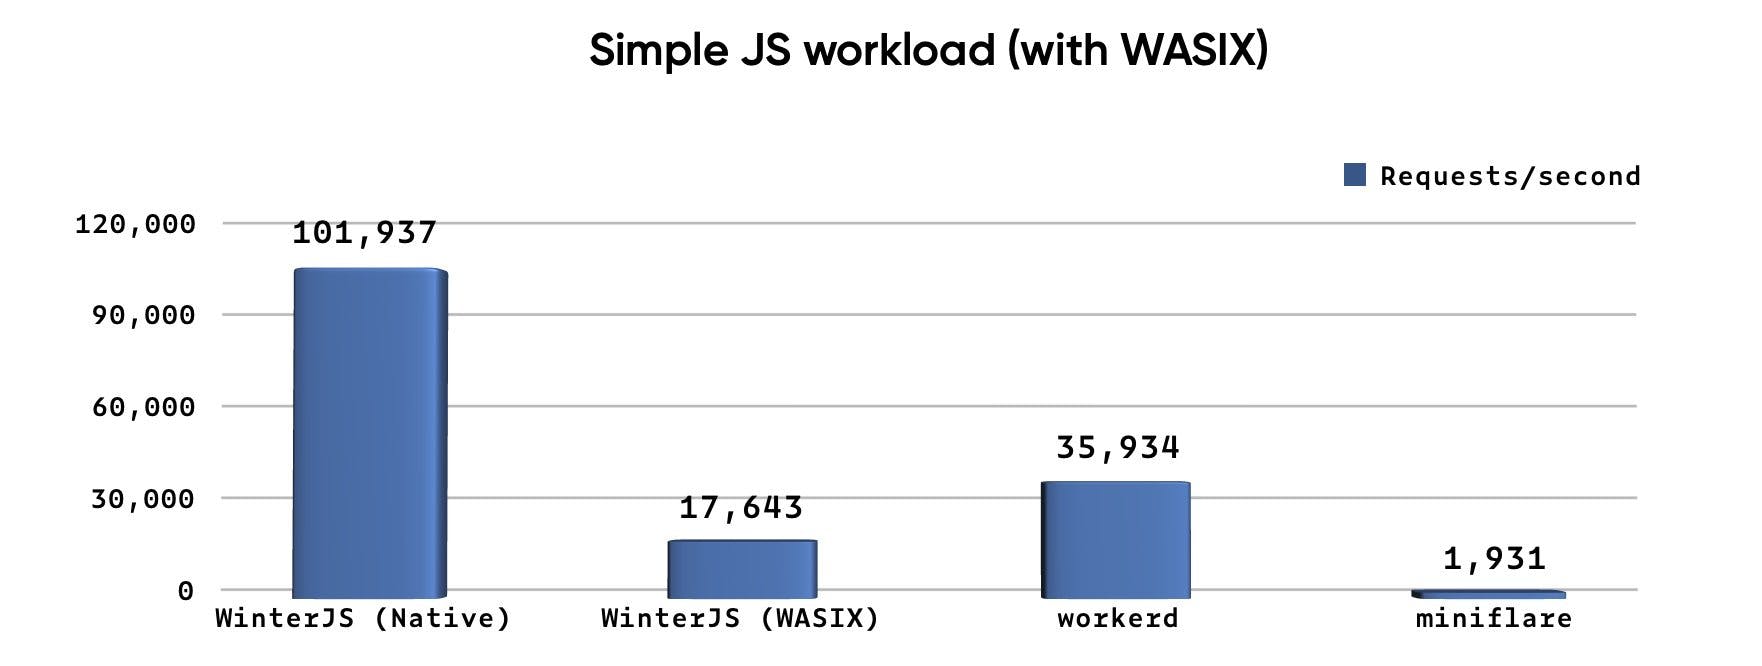 Simple JS Service Workers with WASIX